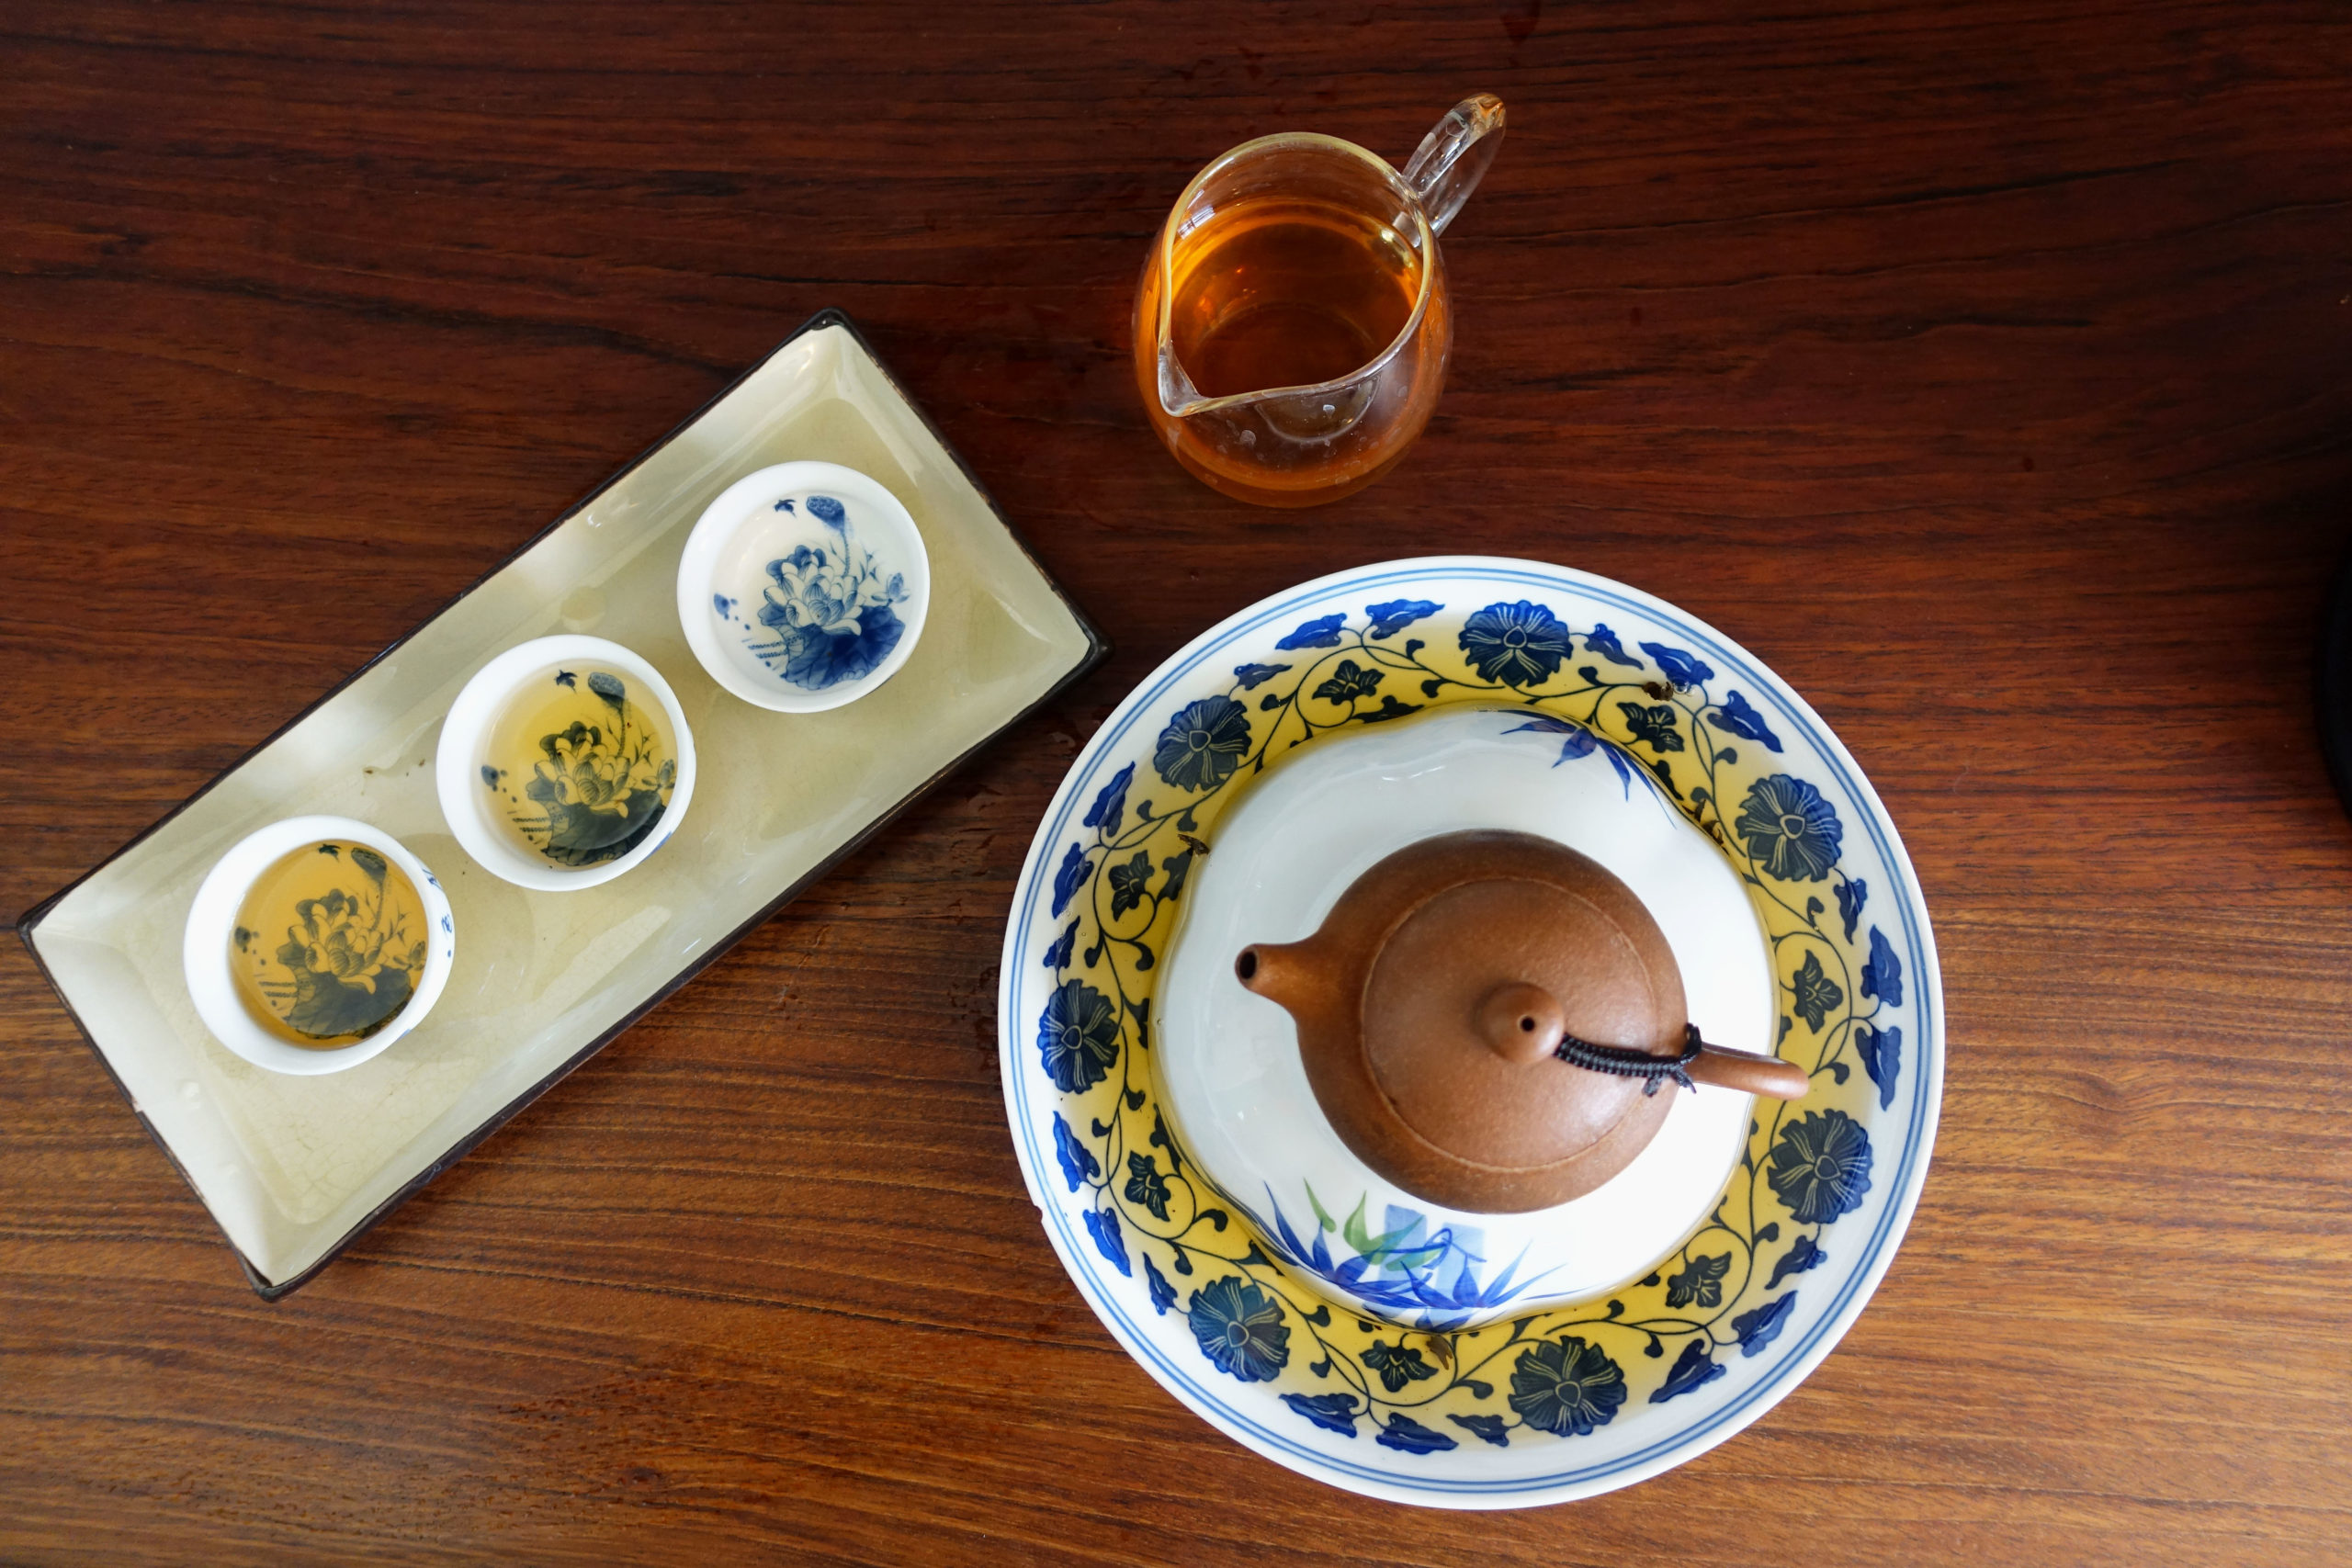 A speckled clay tea pot on a draining dish, with a pitcher full of tea and three tea cups next to it on a wooden table.